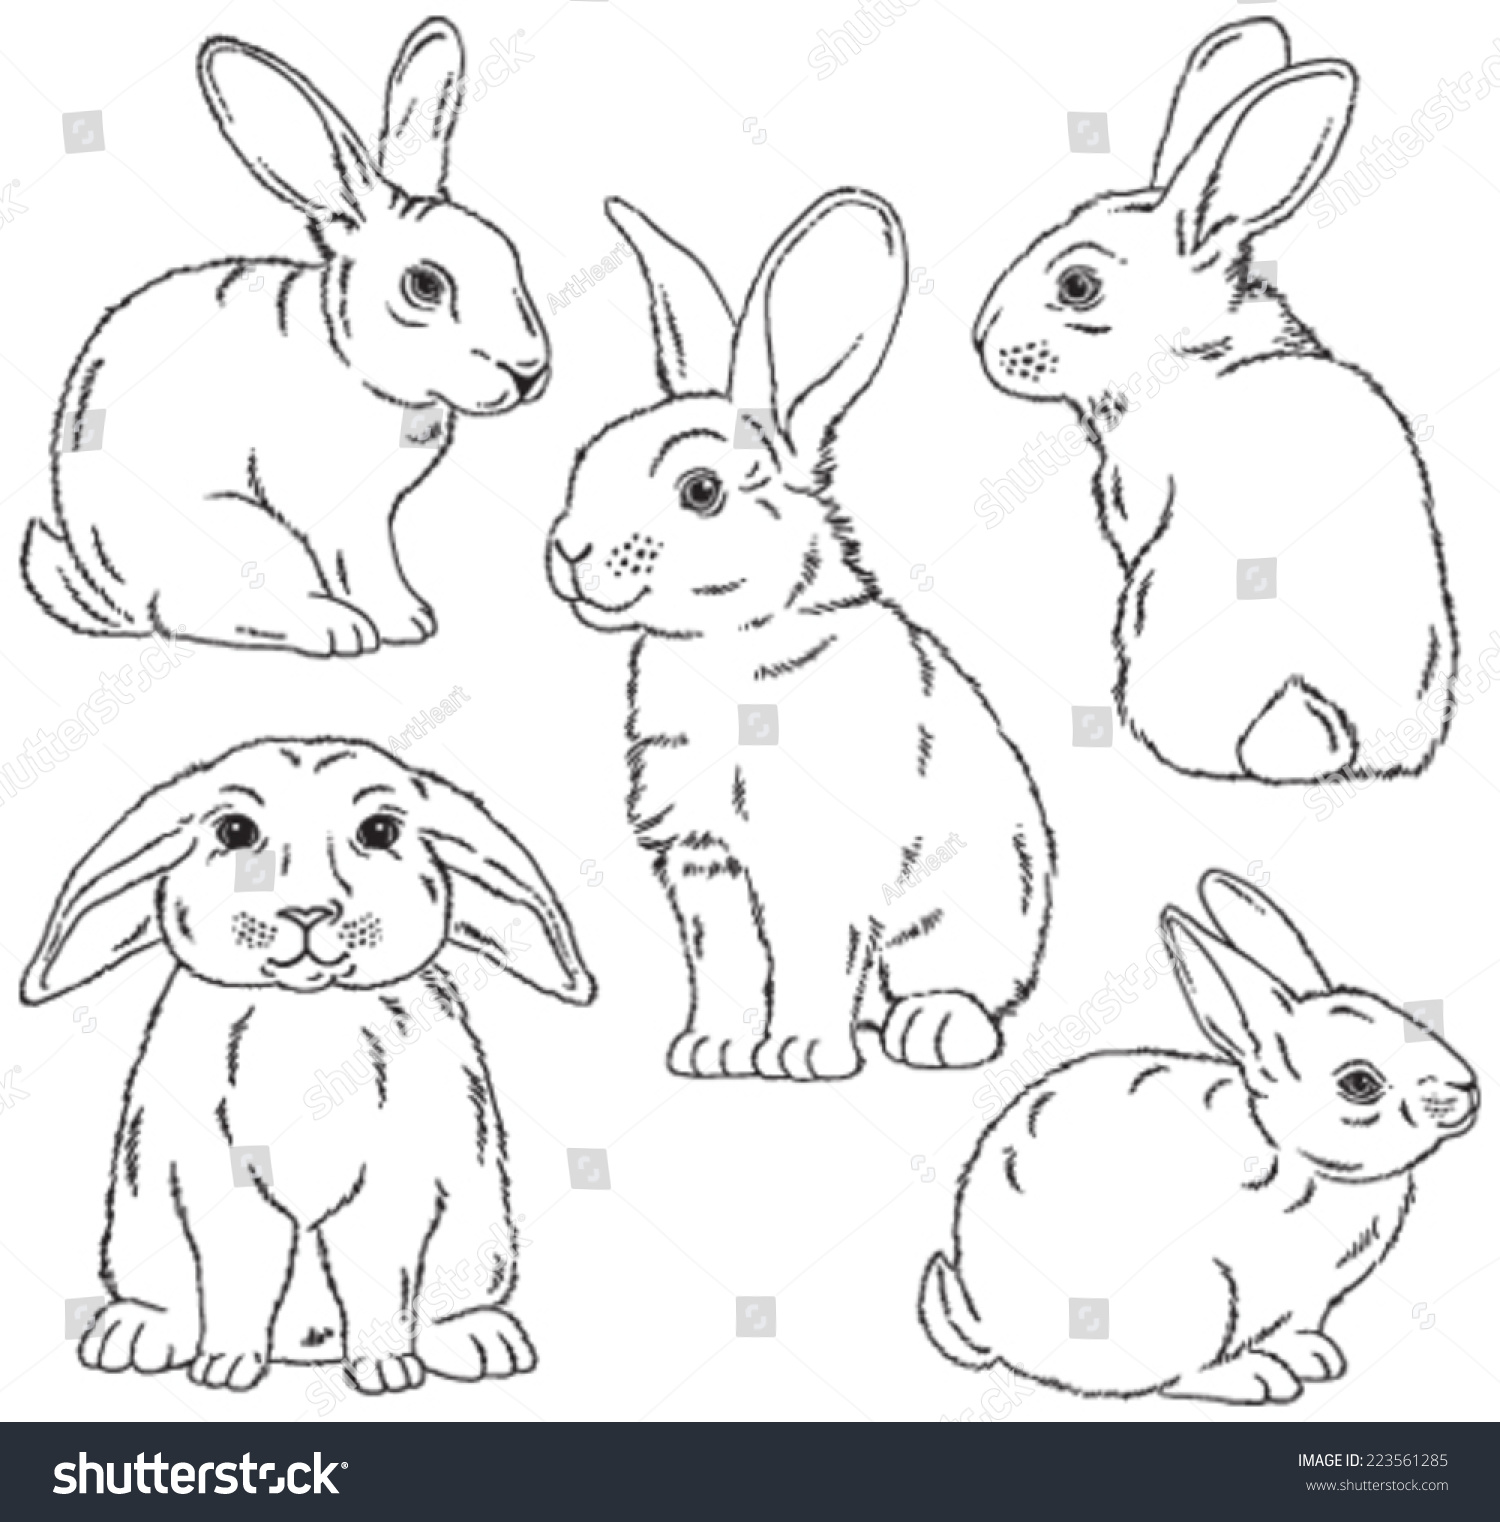 Five Black And White Sketches Of Cute Rabbits Sitting In Various Poses